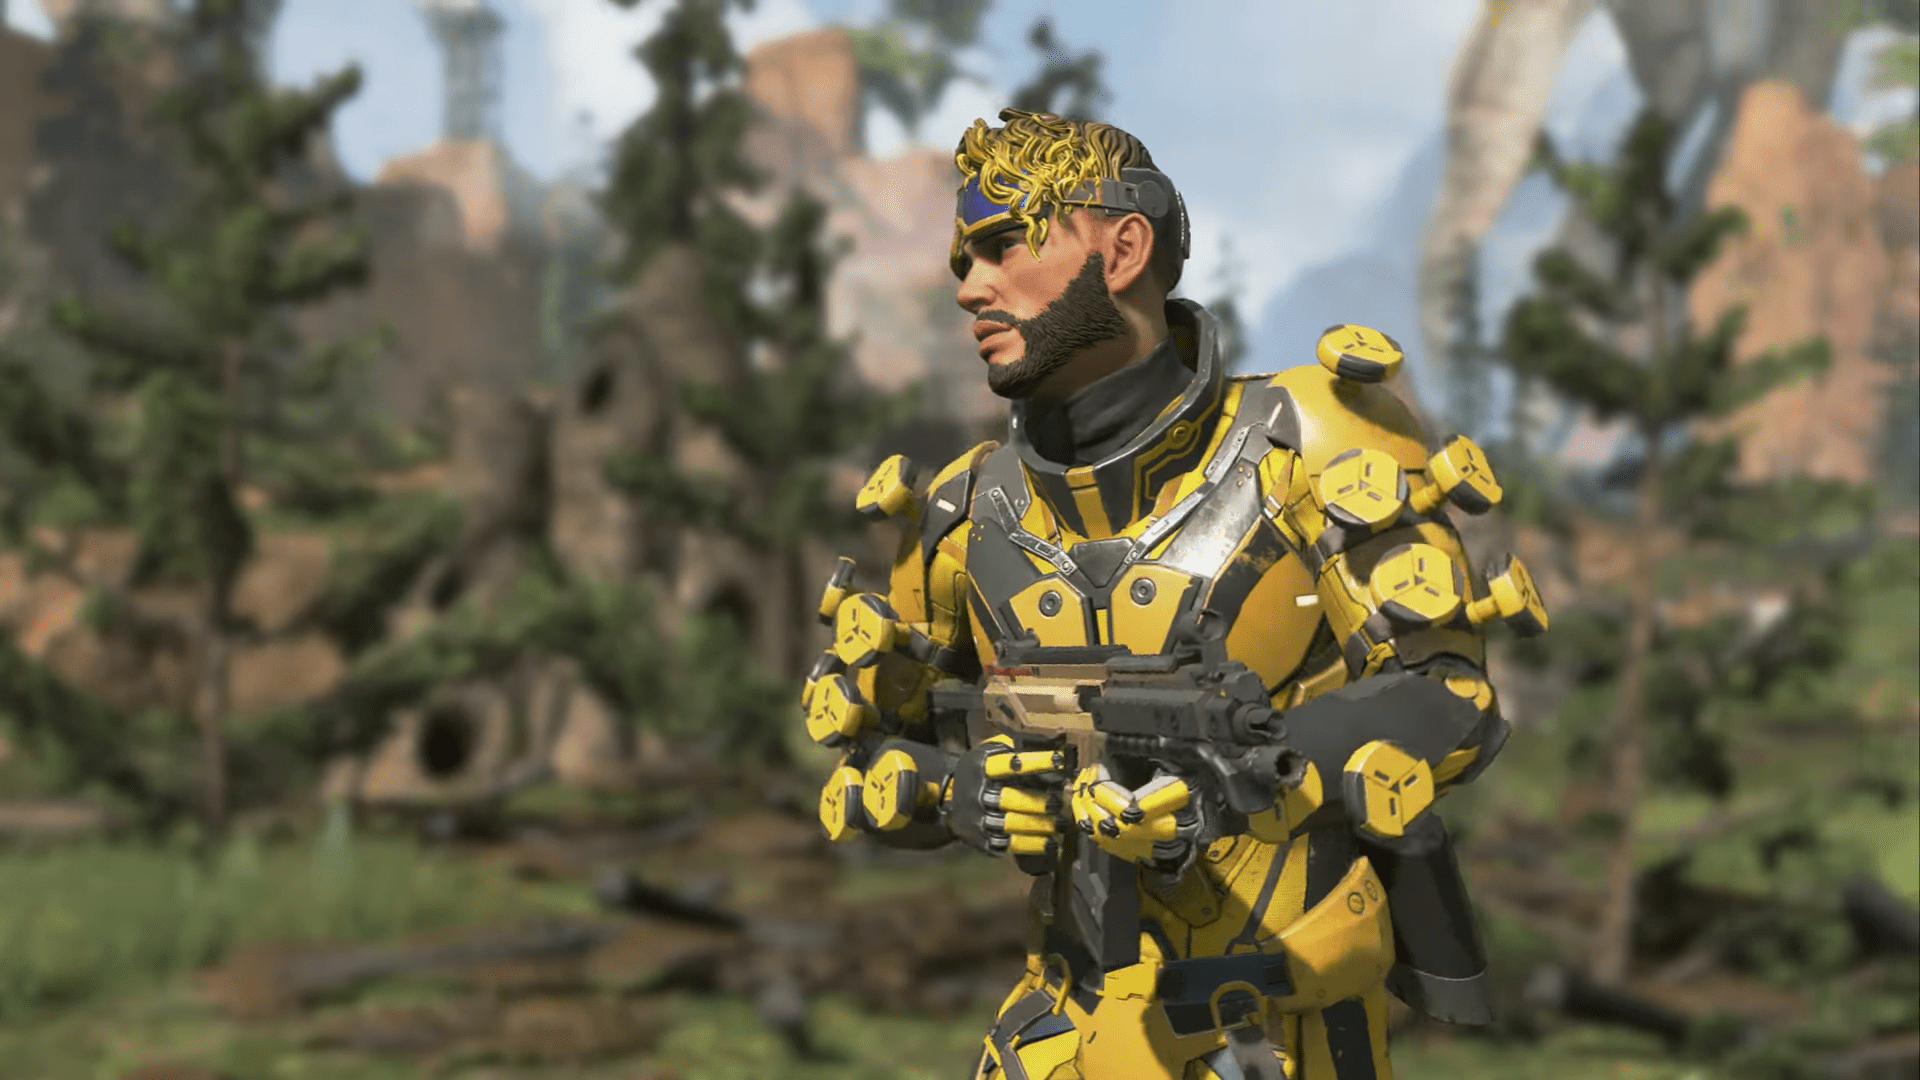 Apex Legends Season 2 Misses The Mark Statistically; EA Share Prices Hit A New Low